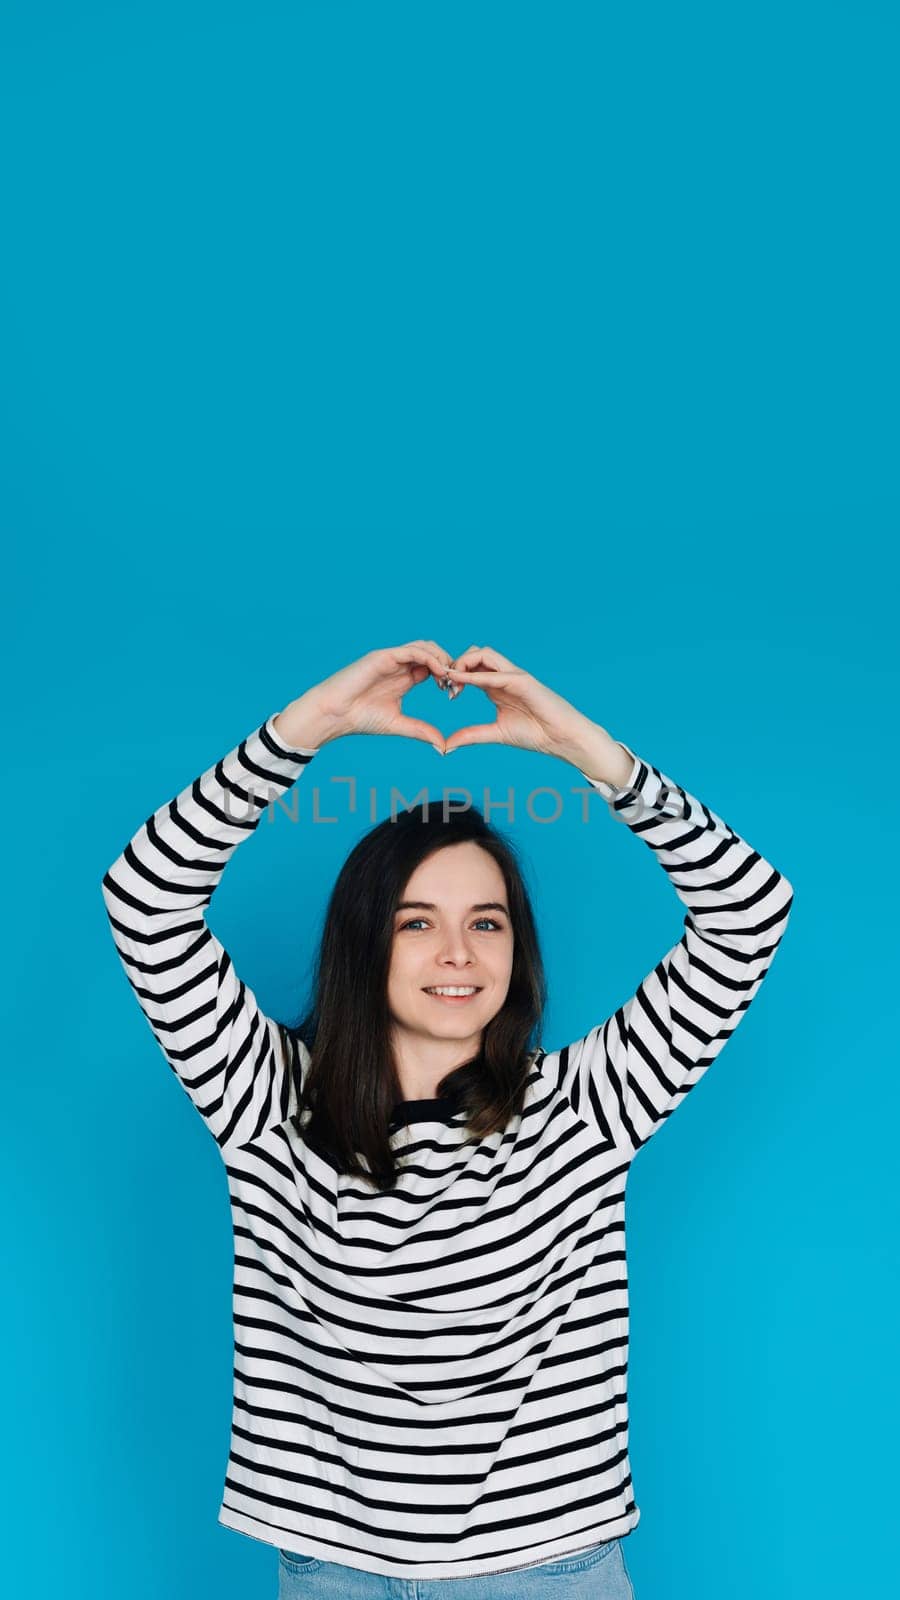 Happy Woman in Striped Sweater Spreading Love and Positivity - Smiling Girl with Raised Arms Forming Heart Shape, Expressing Joy and Affection - Isolated Blue Background - Ideal for Happiness, Love,